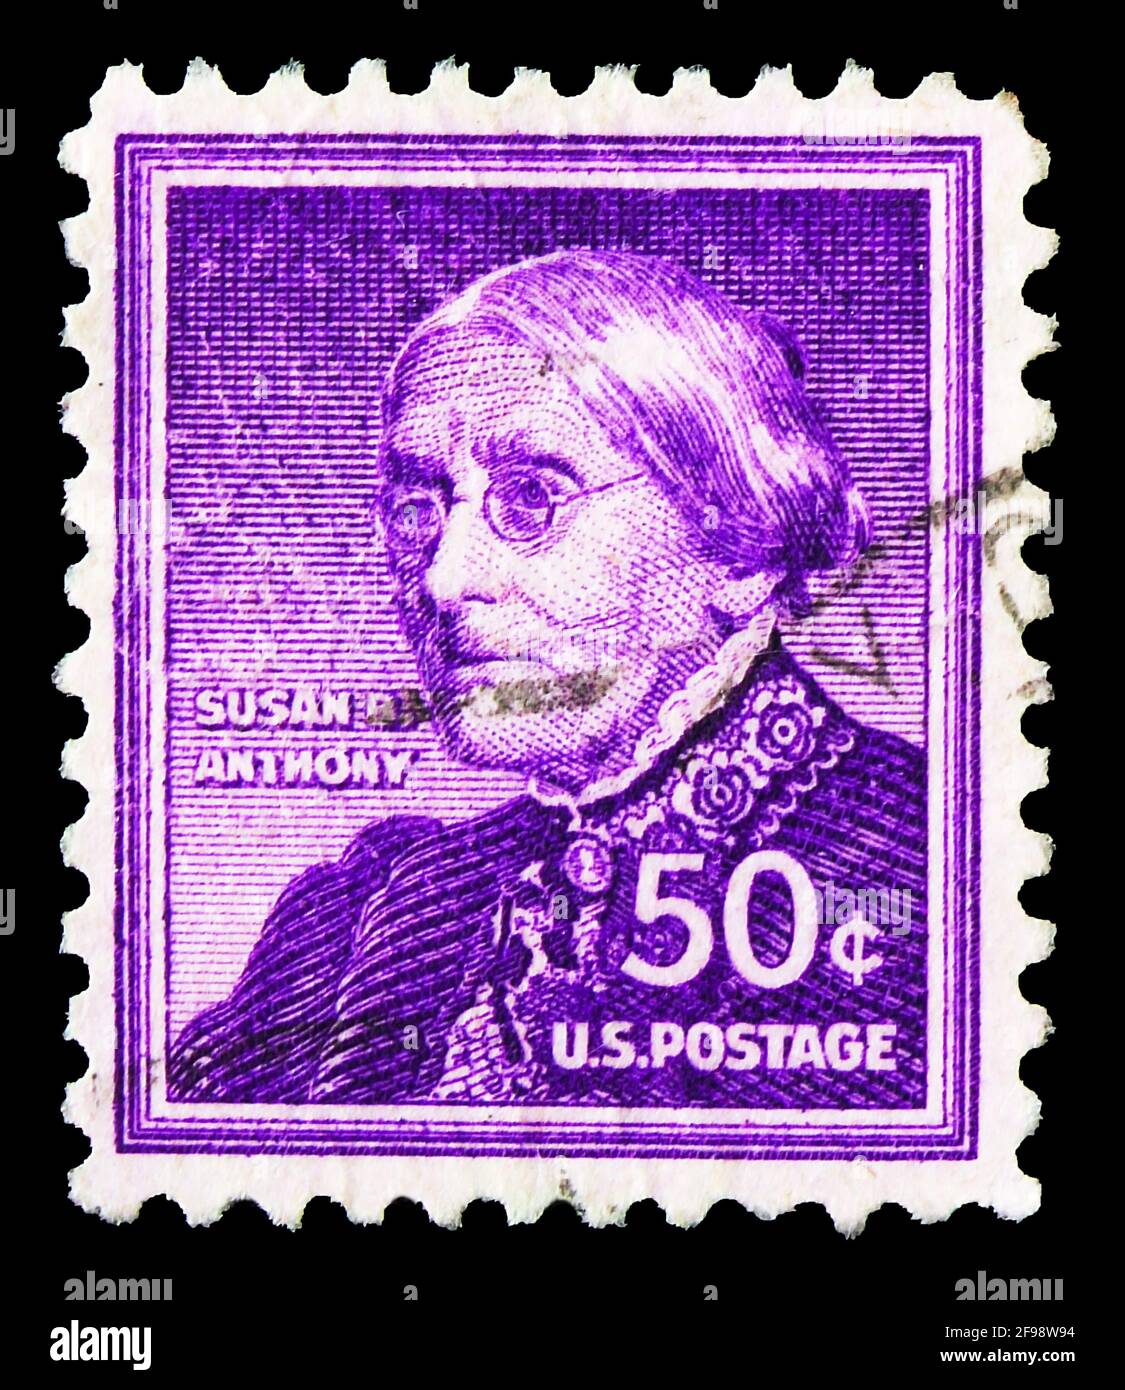 MOSCOW, RUSSIA - NOVEMBER 4, 2019: Postage stamp printed in United States shows Susan B. Anthony (1820-1906), Women's rights activist, Liberty Issue s Stock Photo